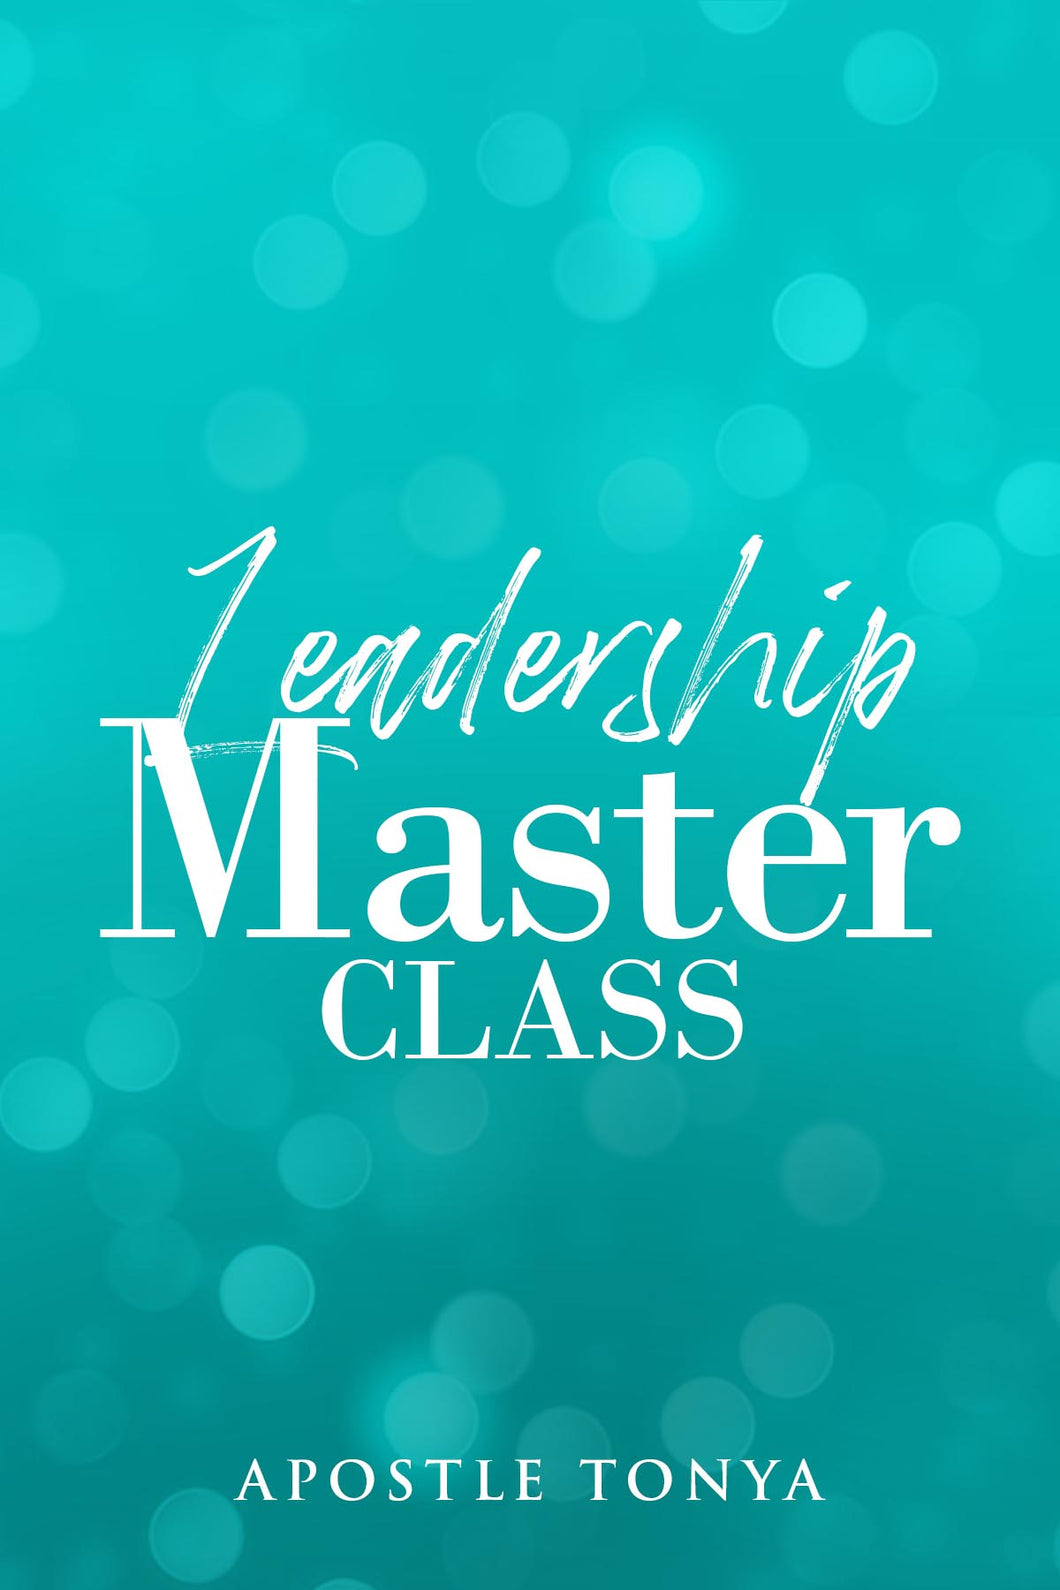 Master Class Leadership: Preparing for Ministry (Part 1)